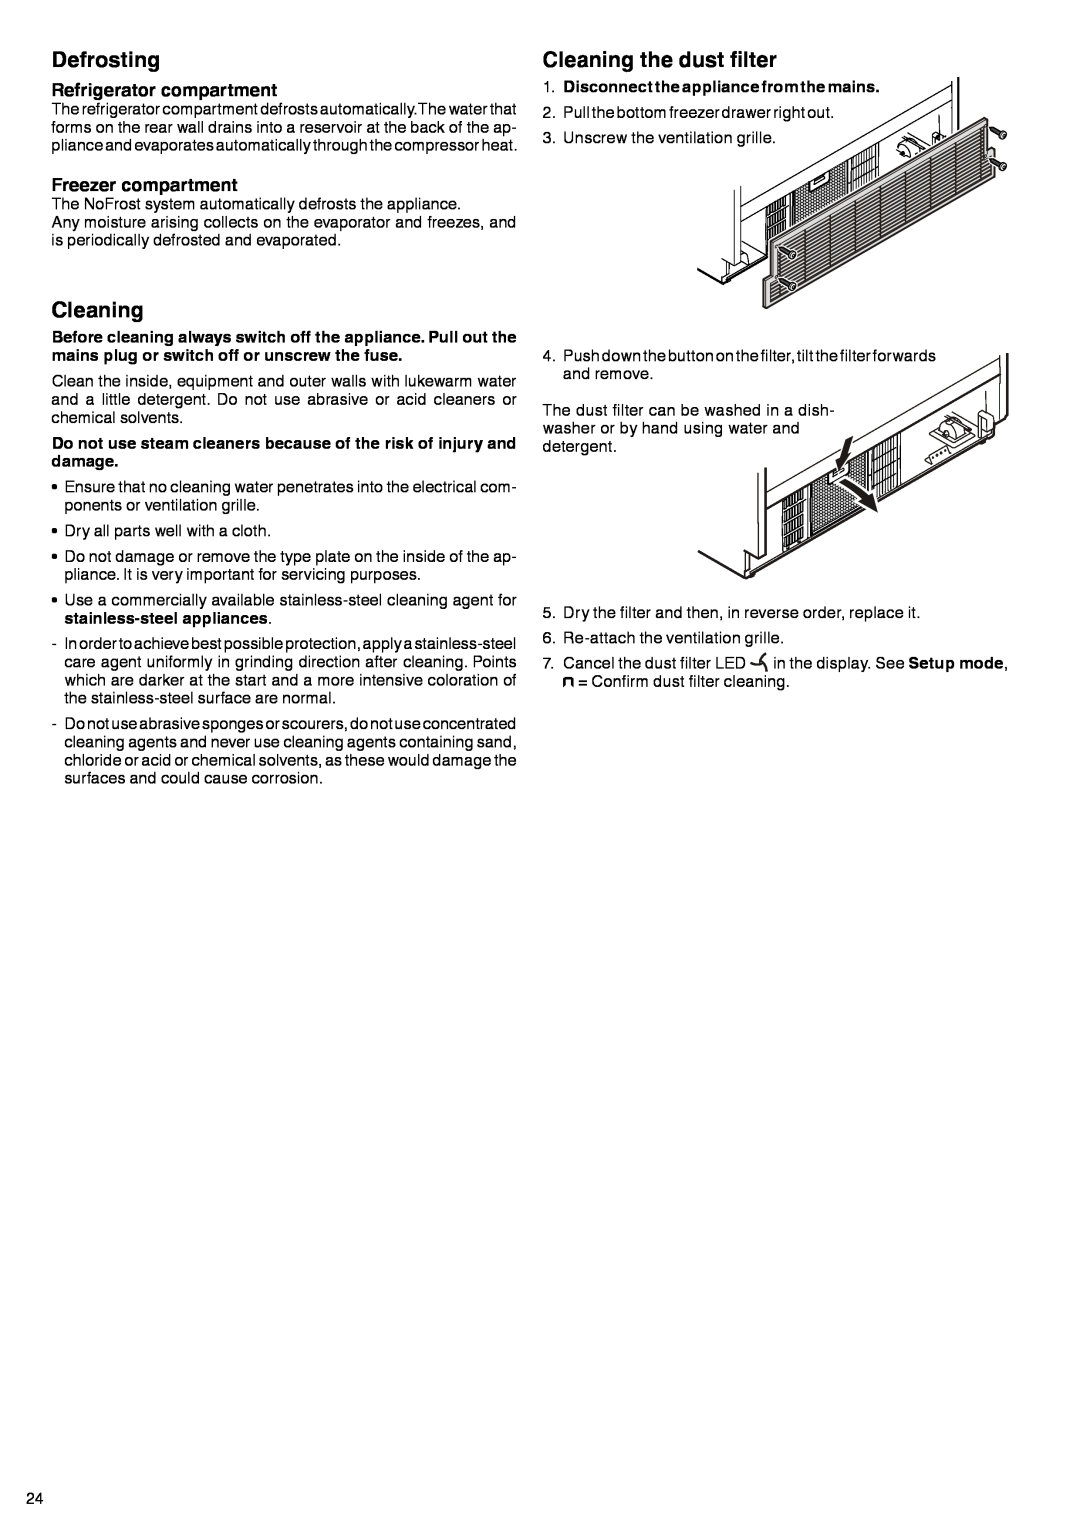 Liebherr 7082-499-00 manual Defrosting, Cleaning the dust filter, Refrigerator compartment, Freezer compartment 